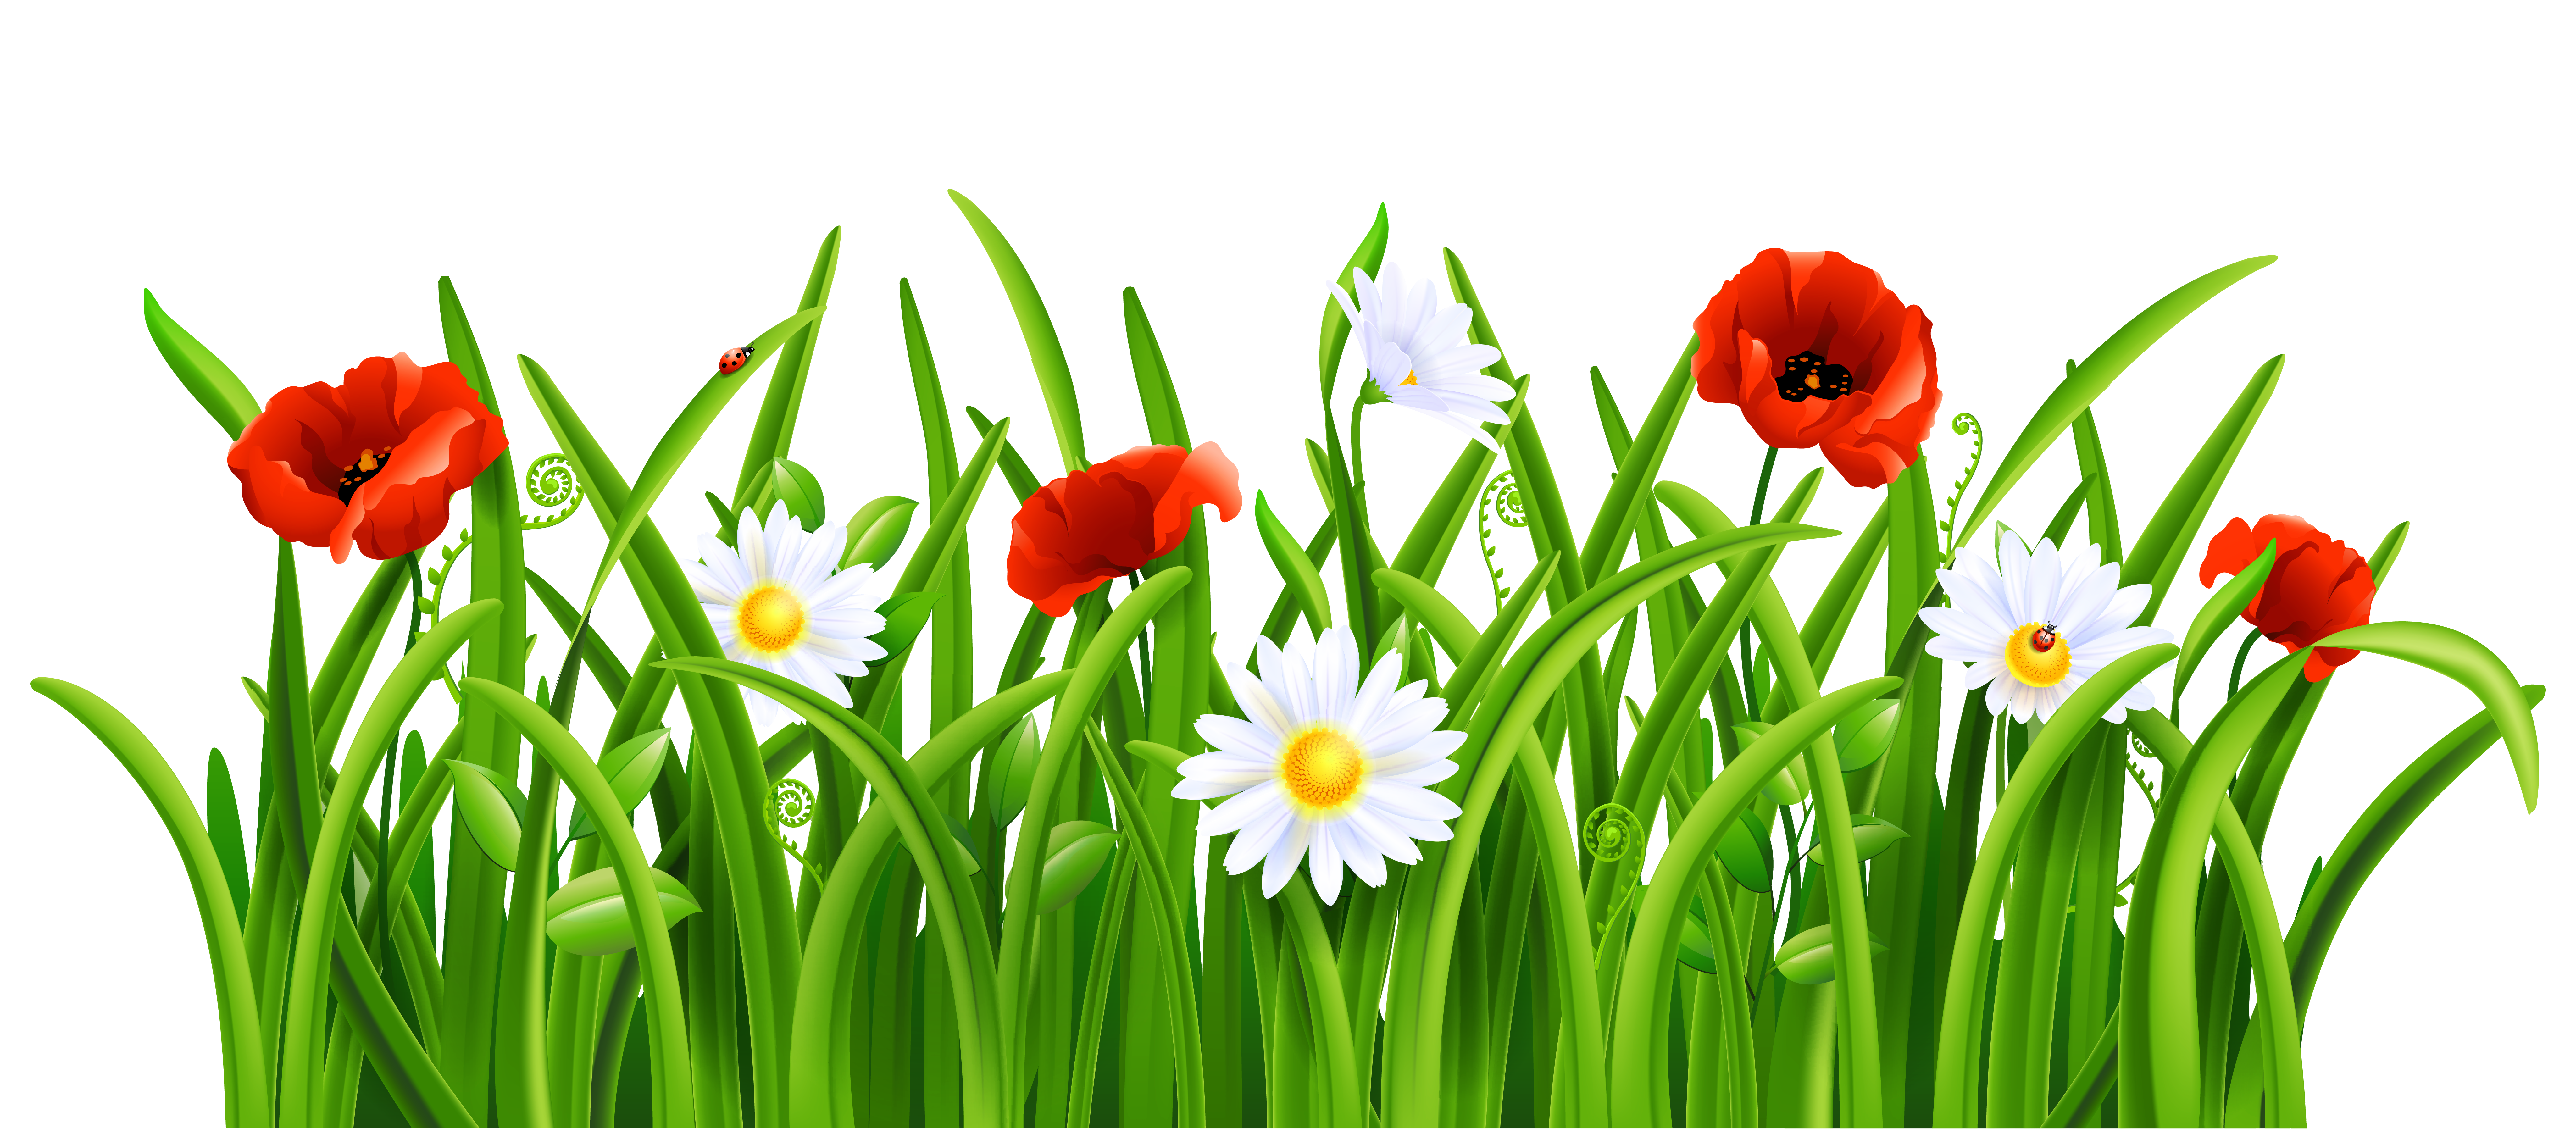 free clipart grass and flowers - photo #19